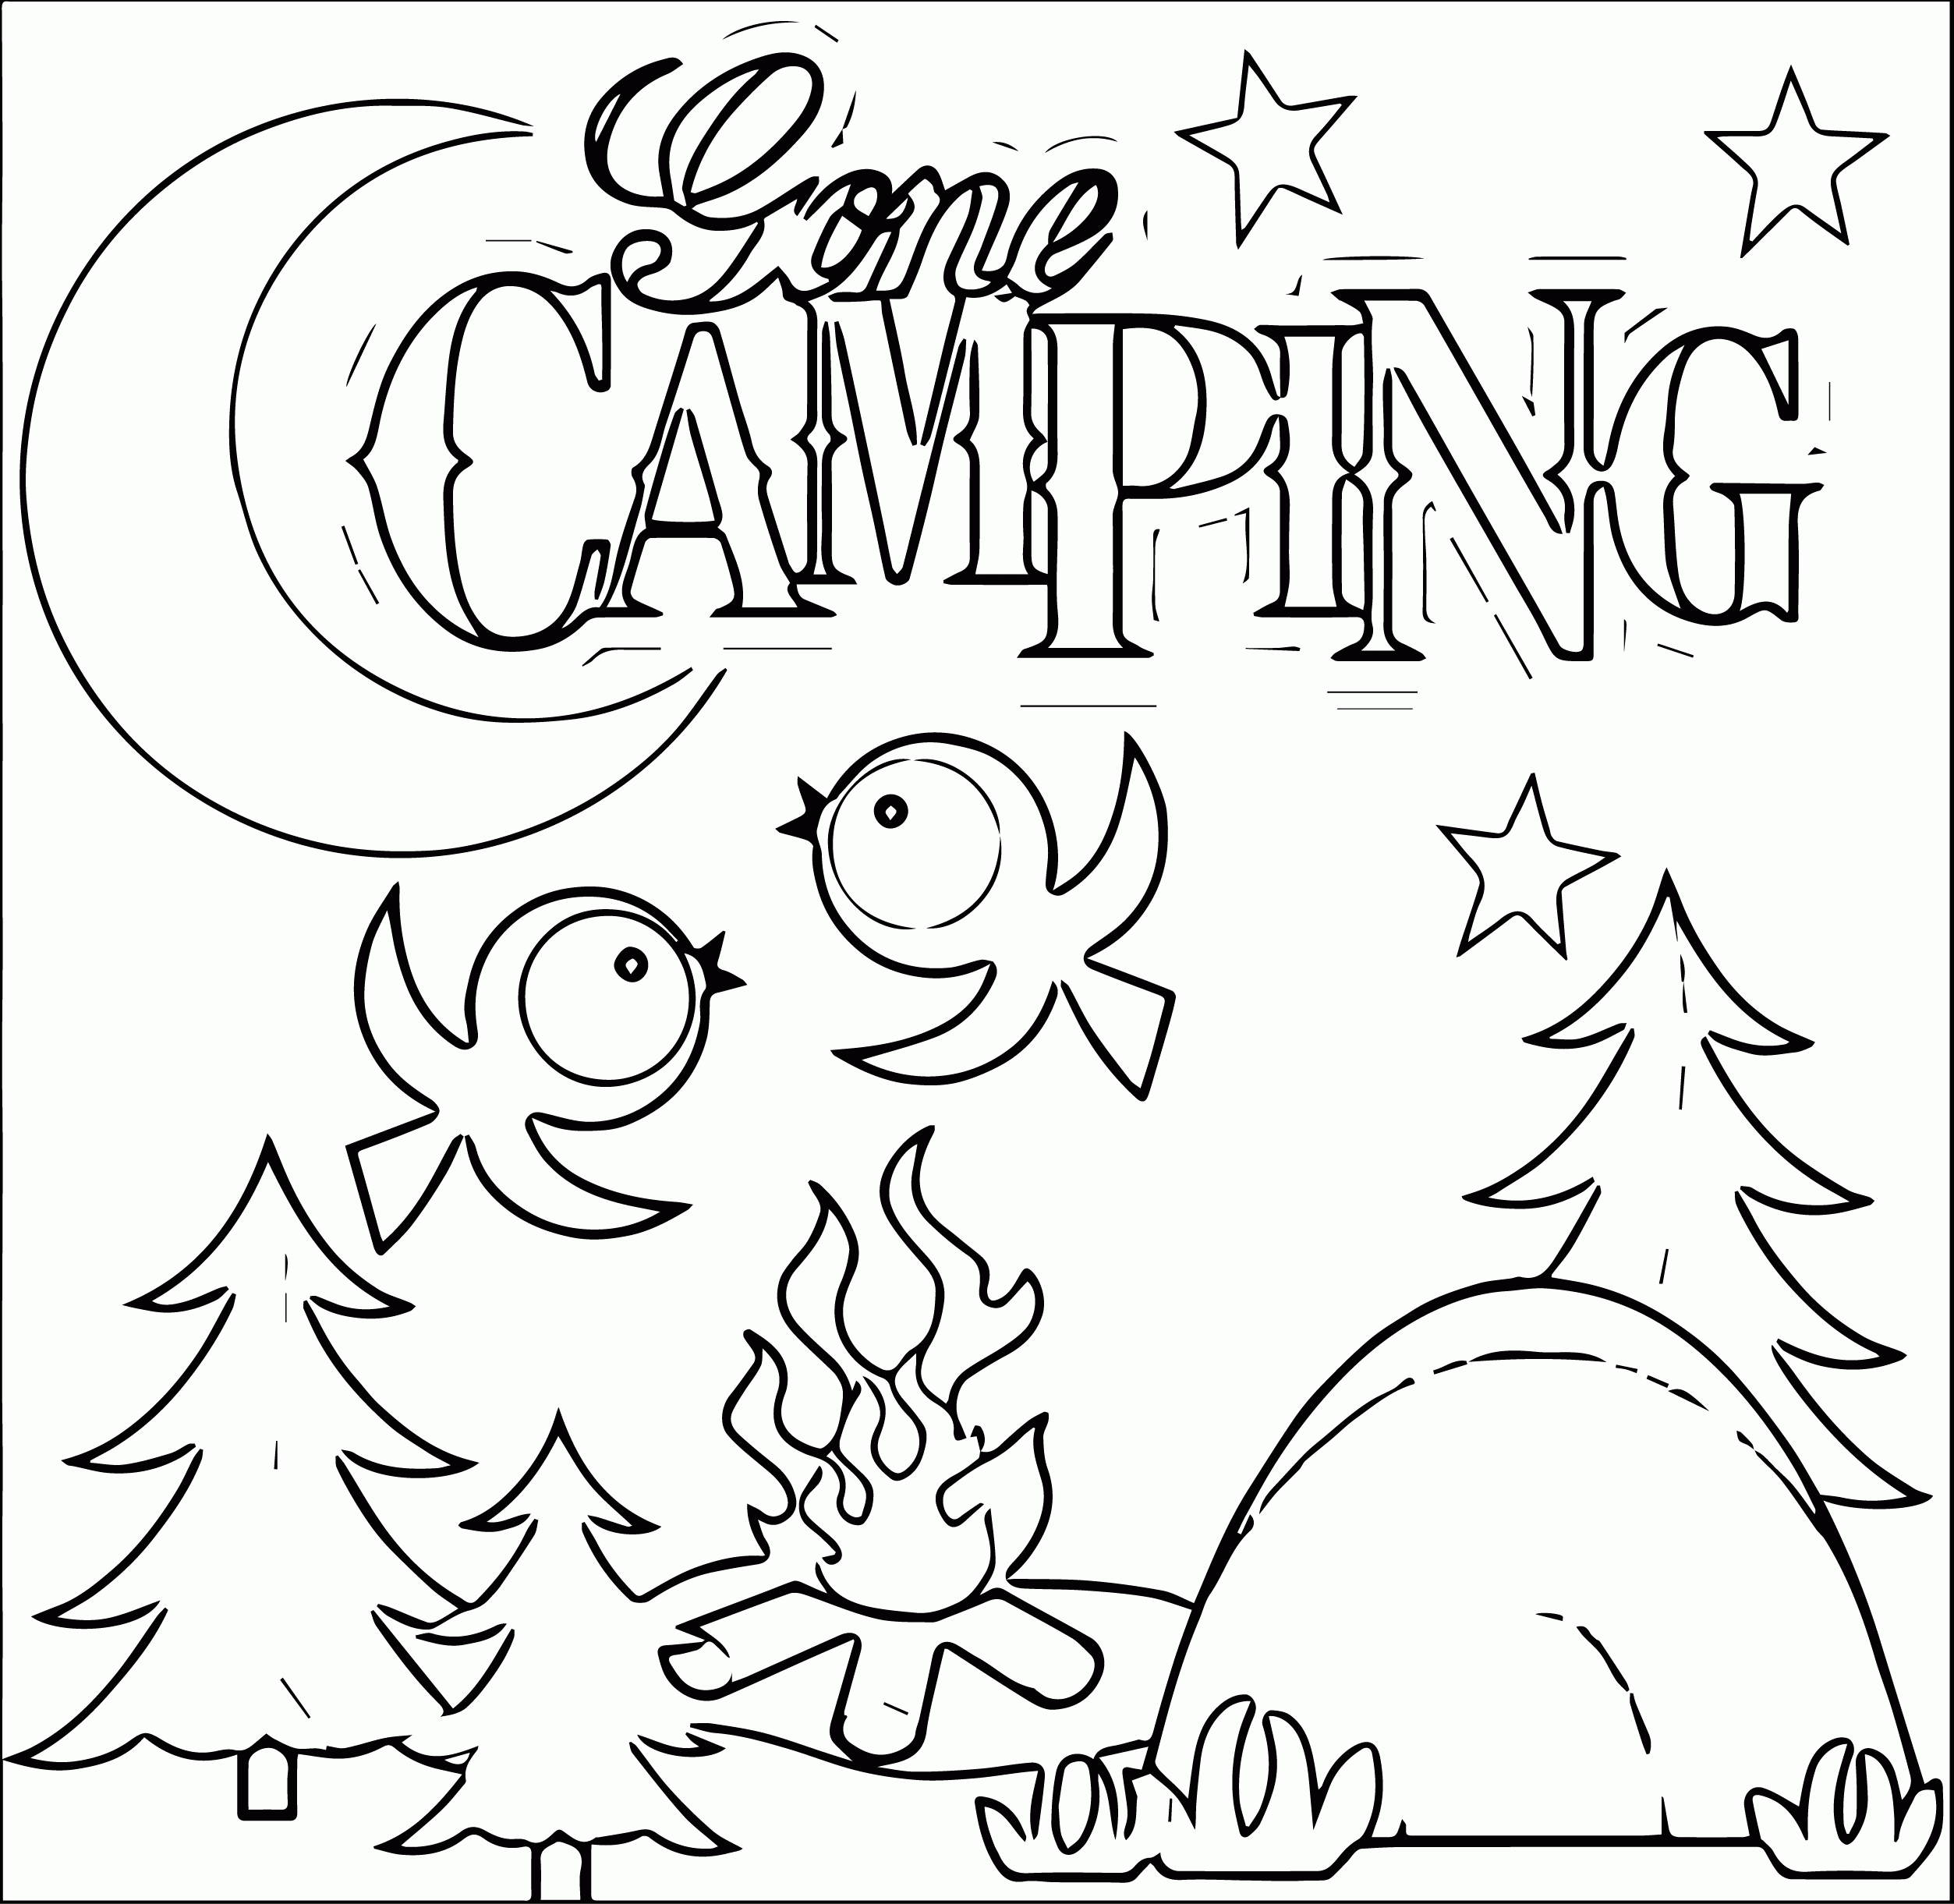 gone-camping-coloring-page-coloring-home